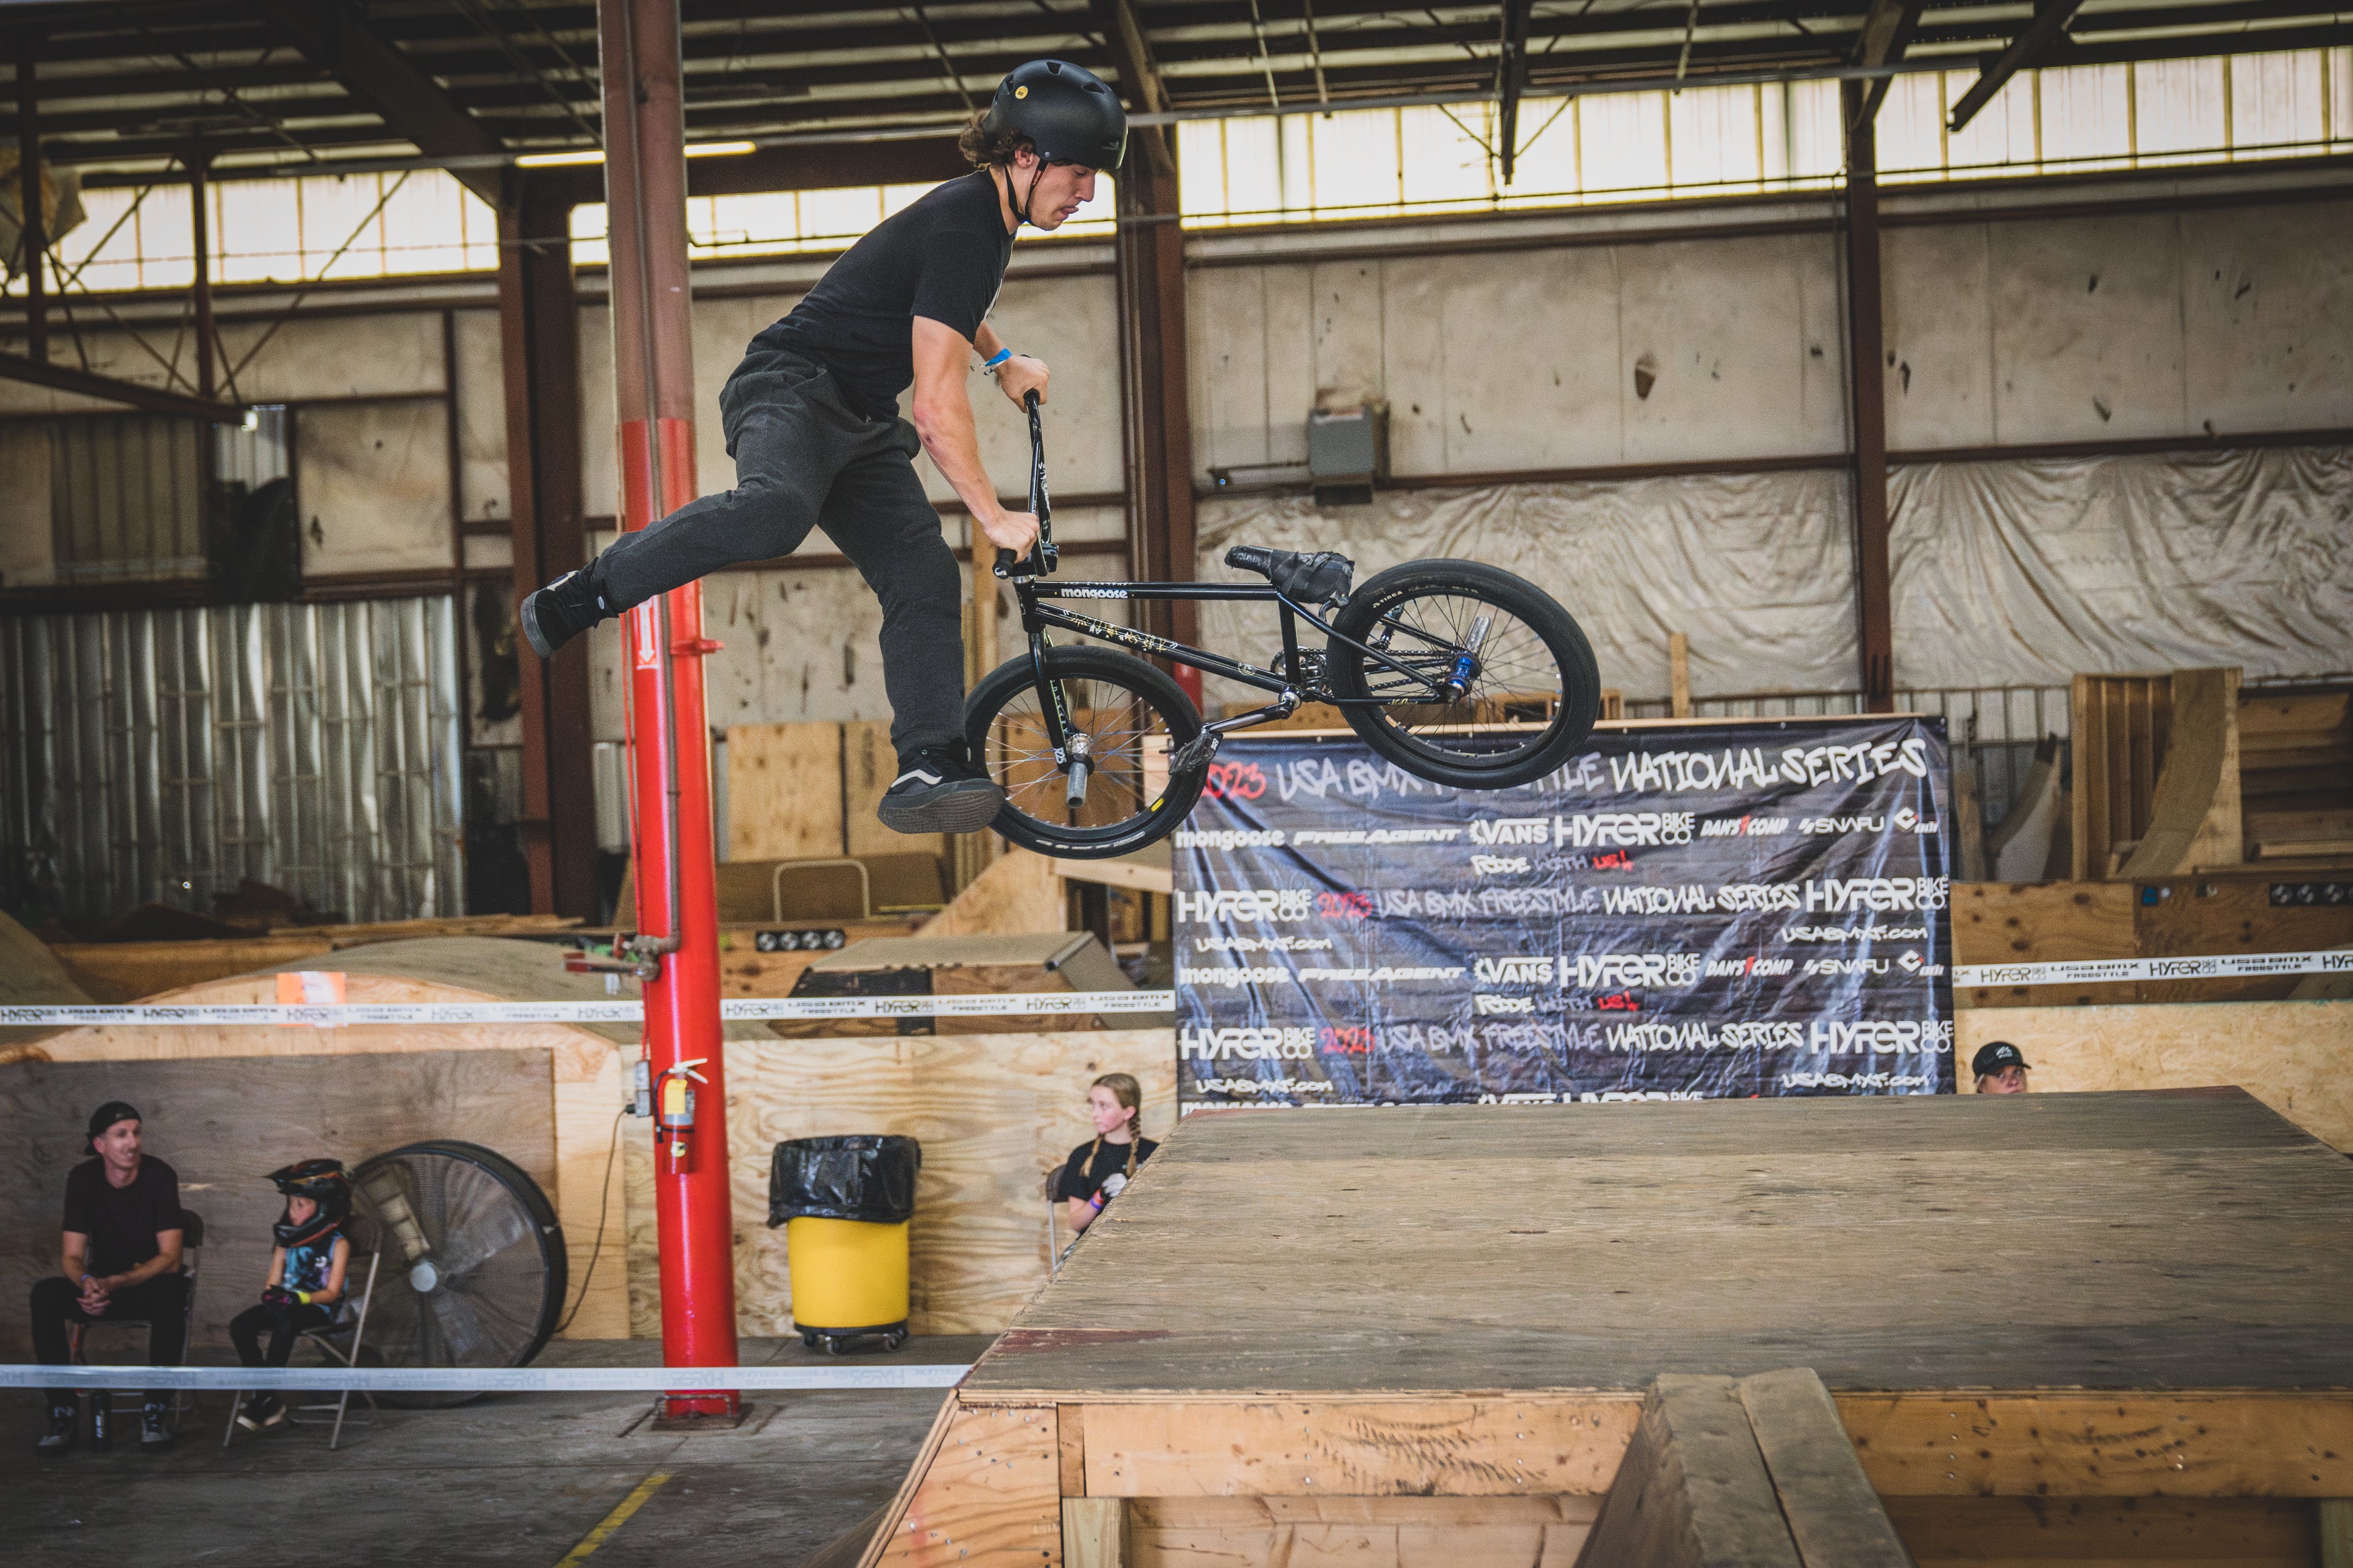 USA BMX Freestyle Series Stop 6: Mongoose Am Jam at the Hanger in NC